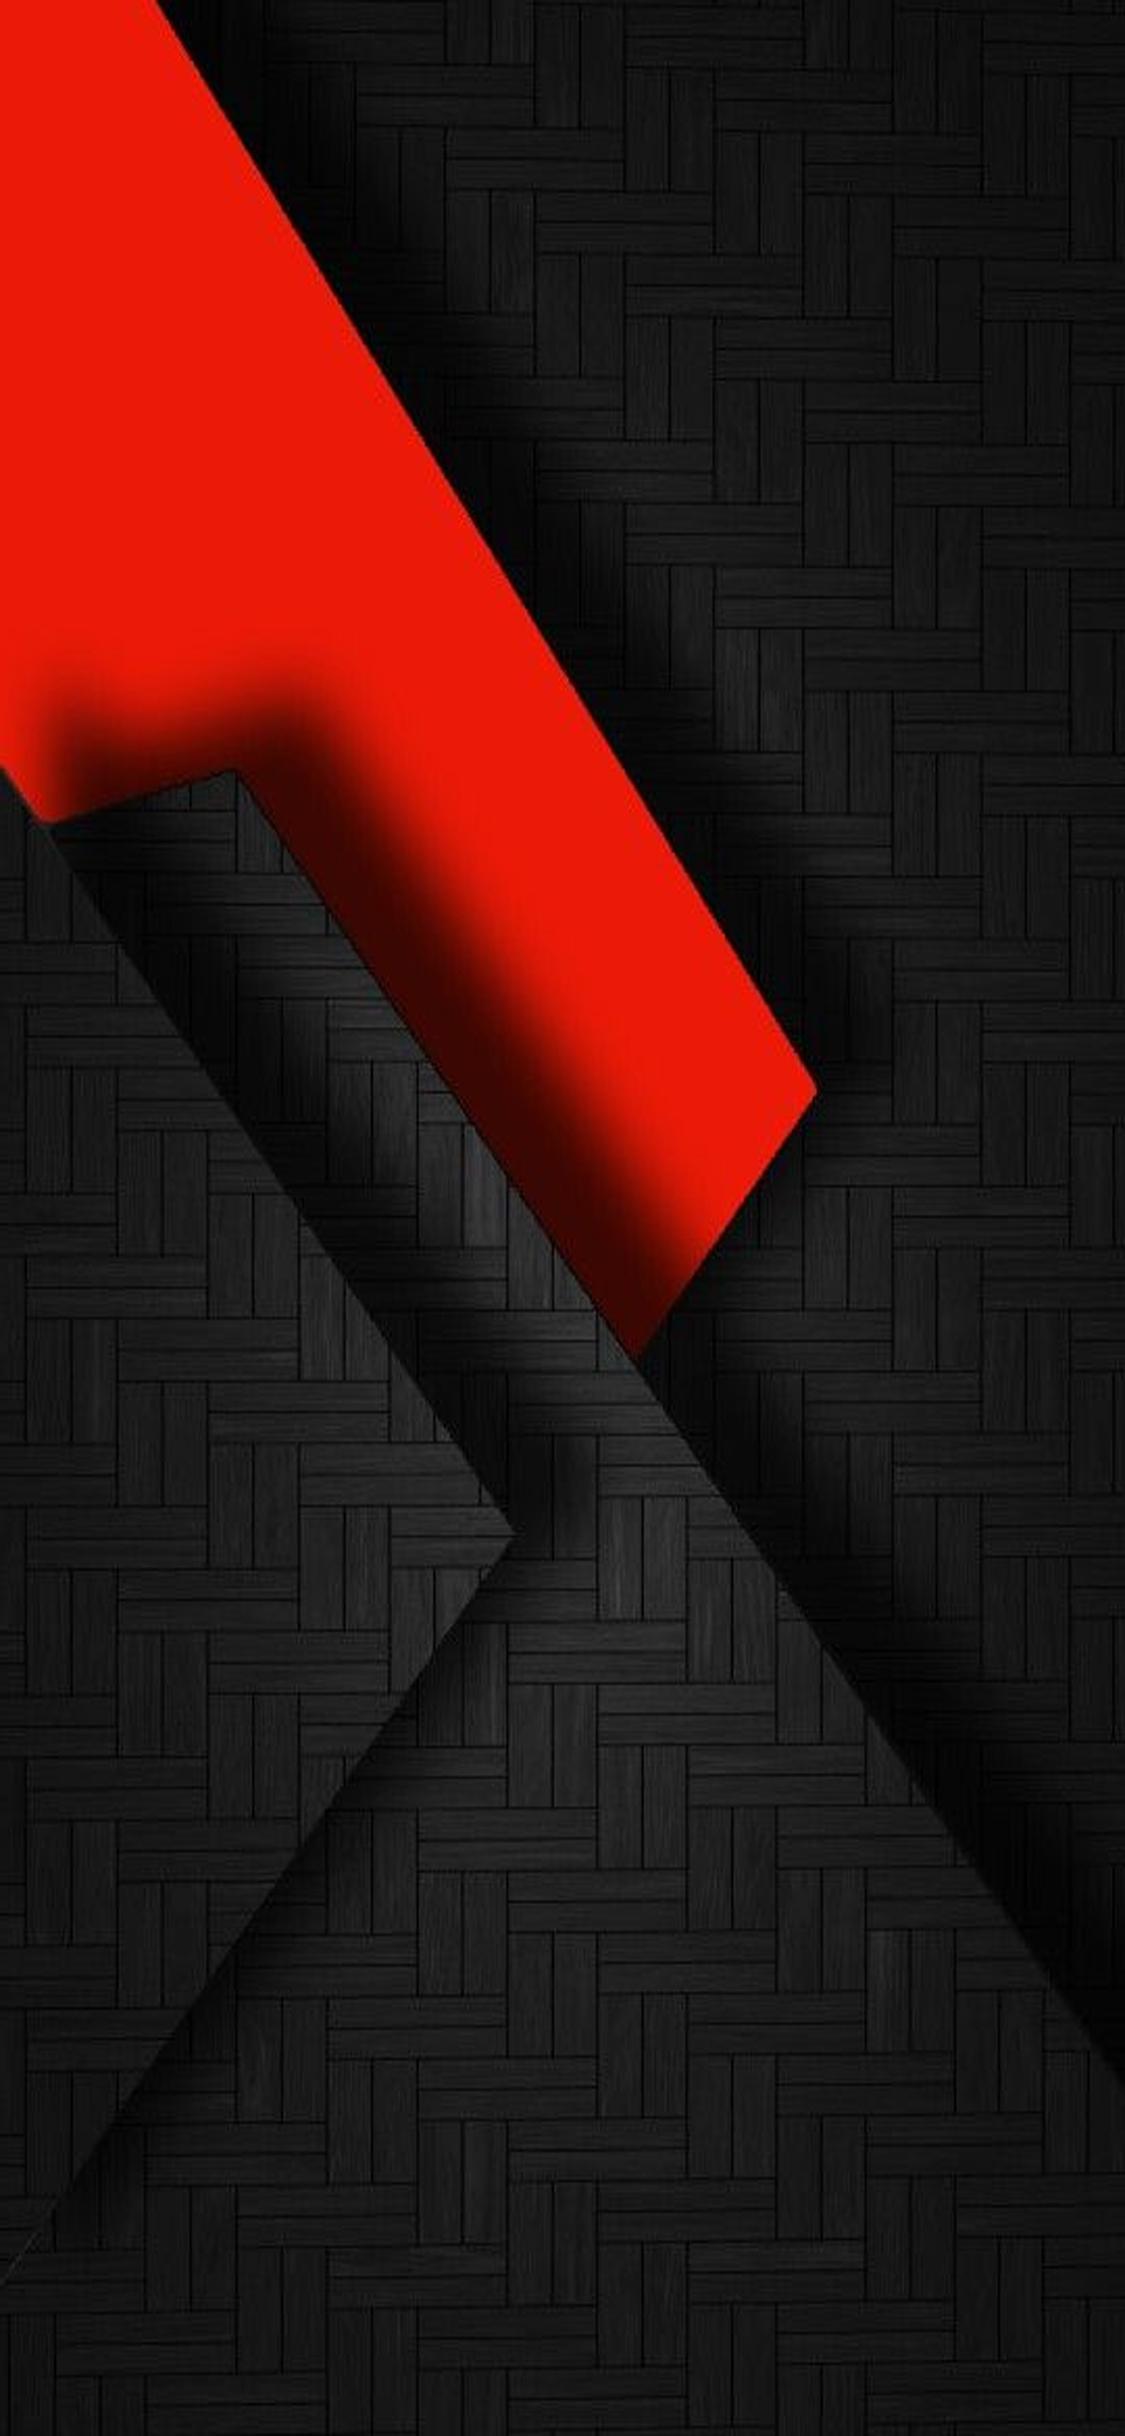 Red and Black iPhone Wallpaper, HD Red and Black iPhone Background on WallpaperBat